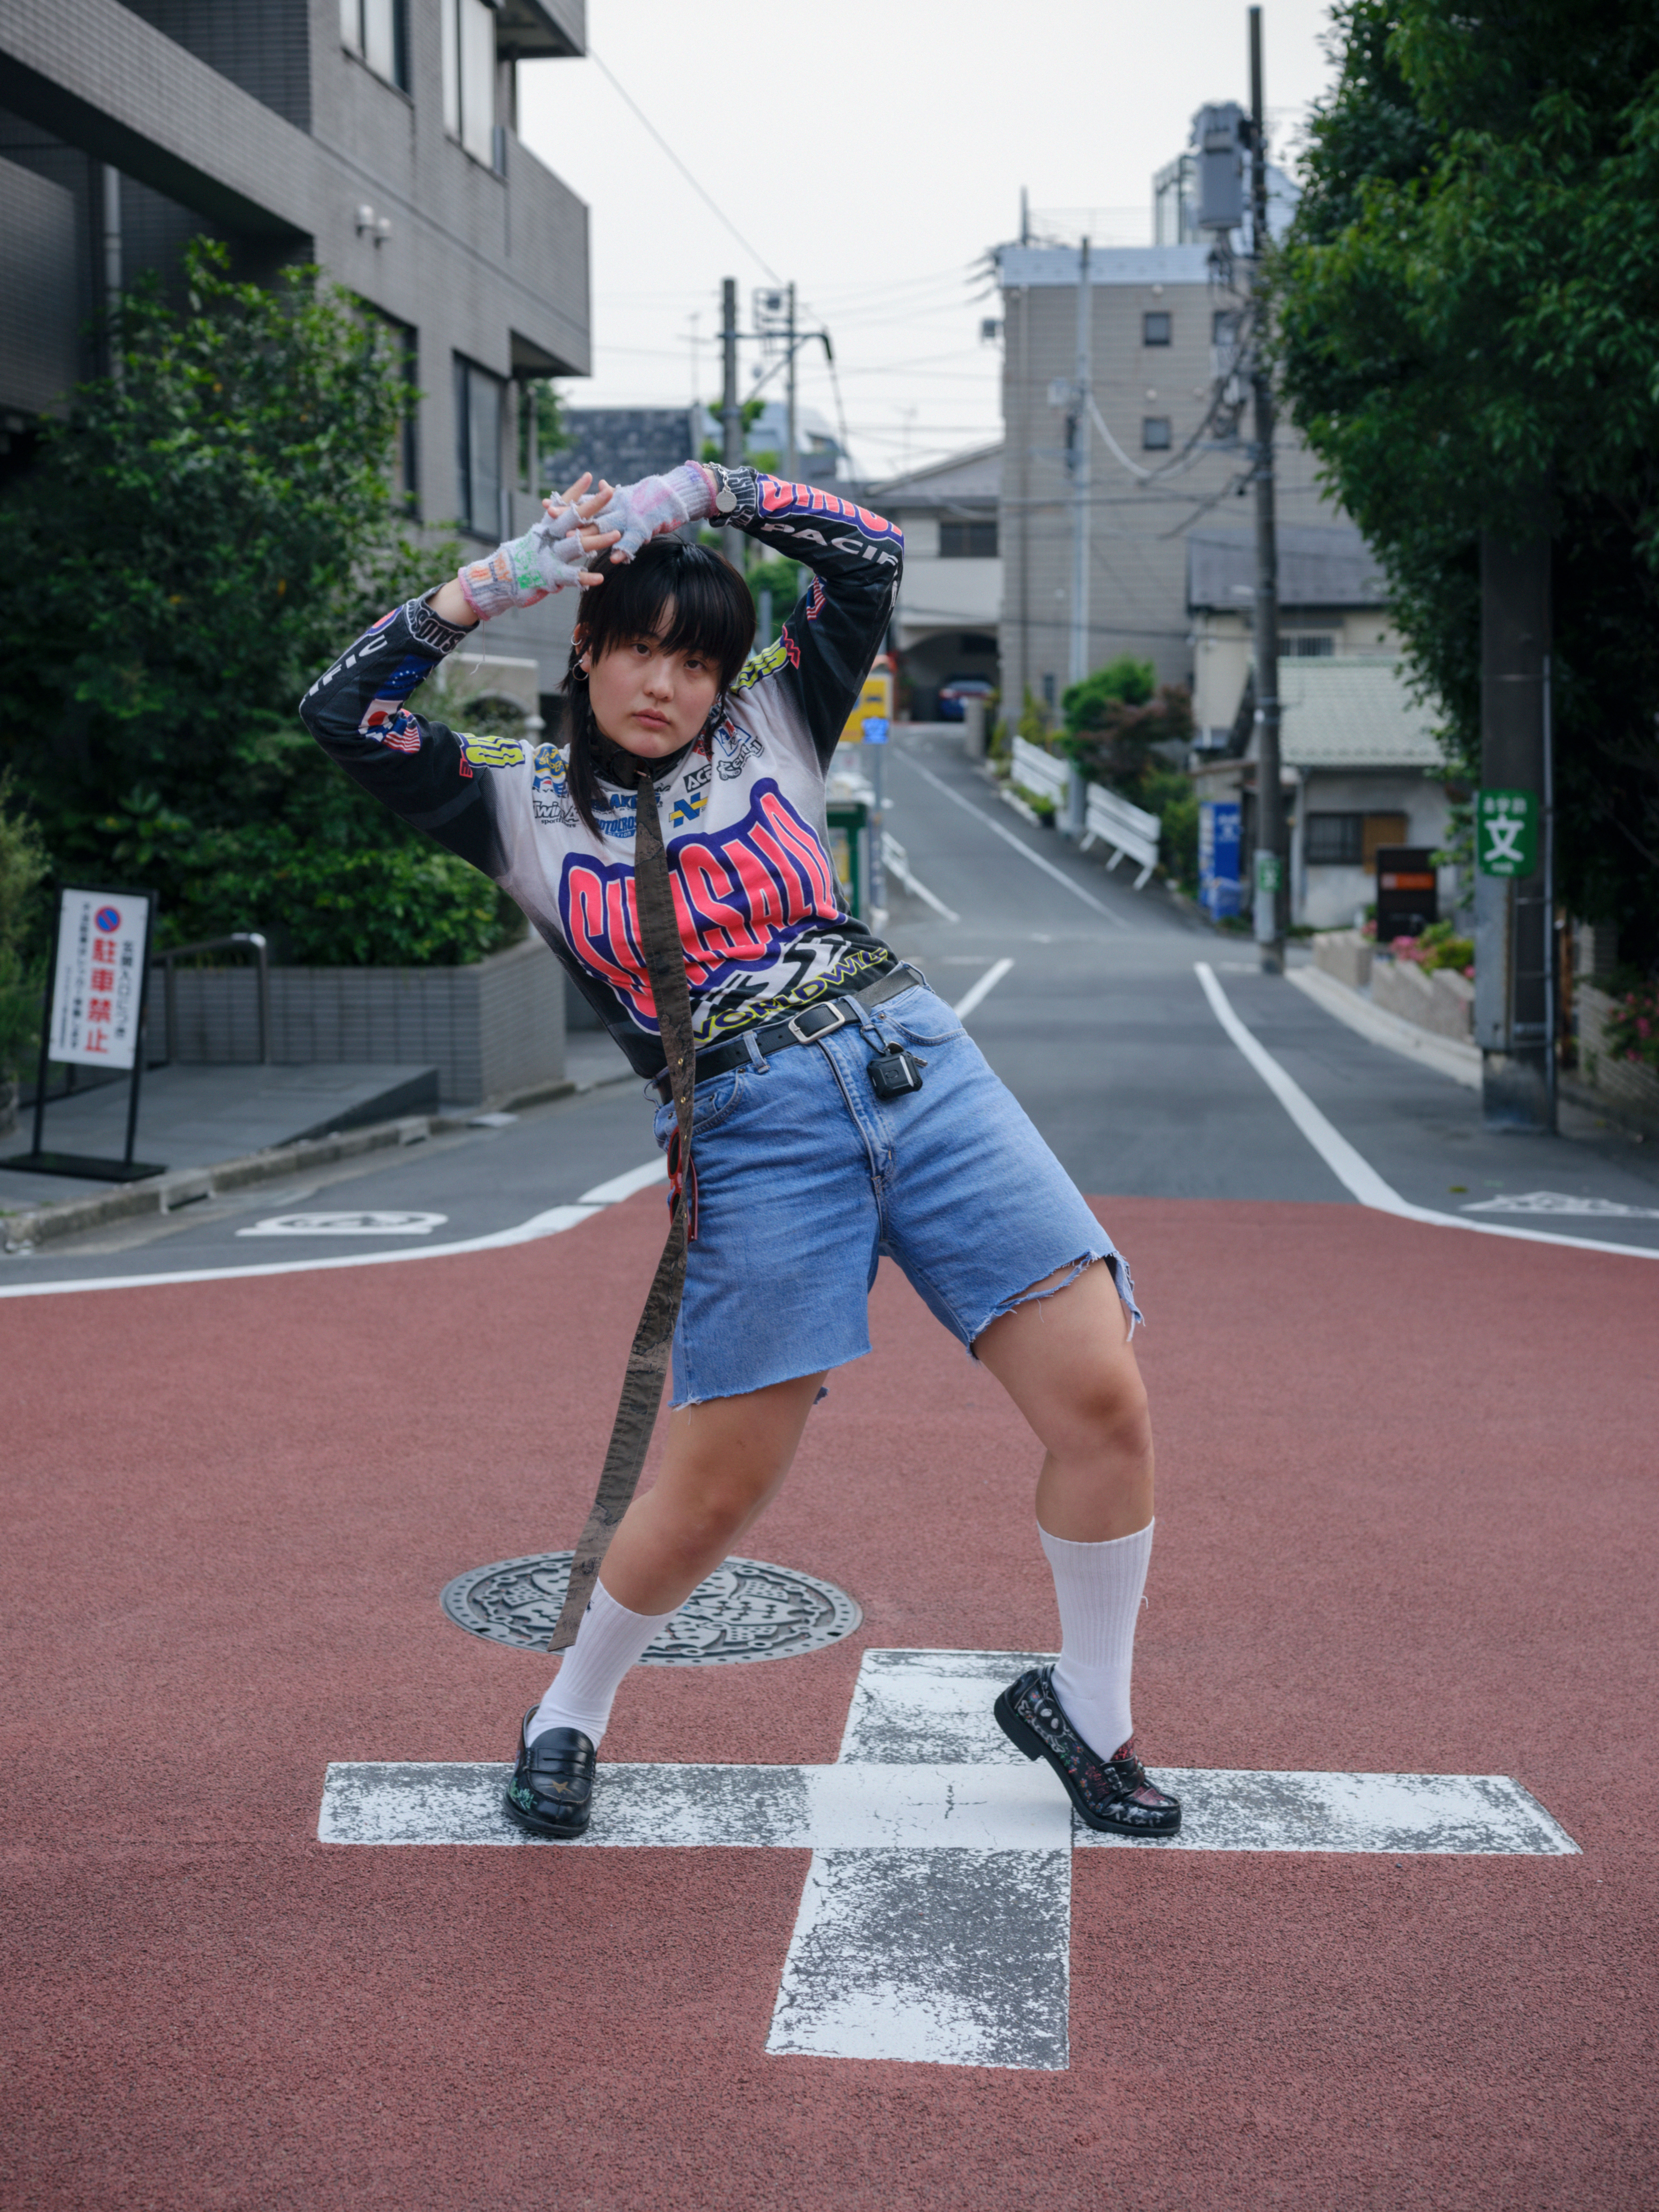 a person in a motocross shirt and denim shorts is interestingly leaning with his arms above his head in the middle of a tokyo residential street 